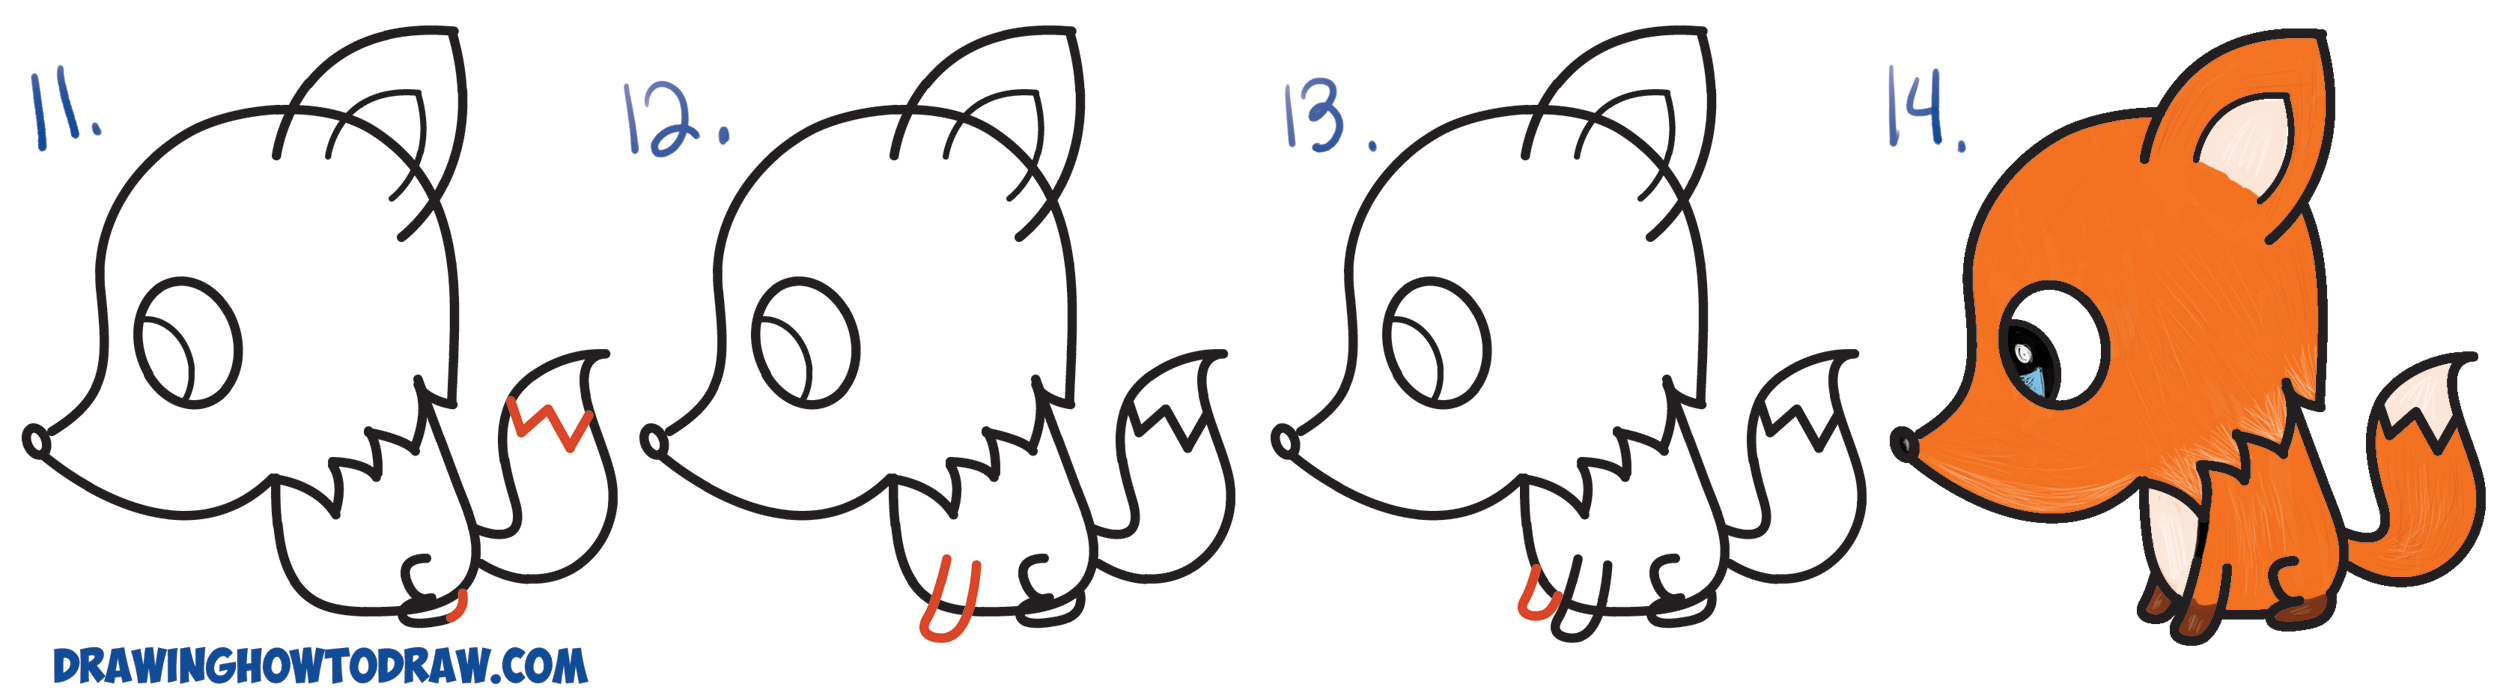 how to draw cute chibi kawaii fox easy step by step drawing tutorial for kids beginners 2